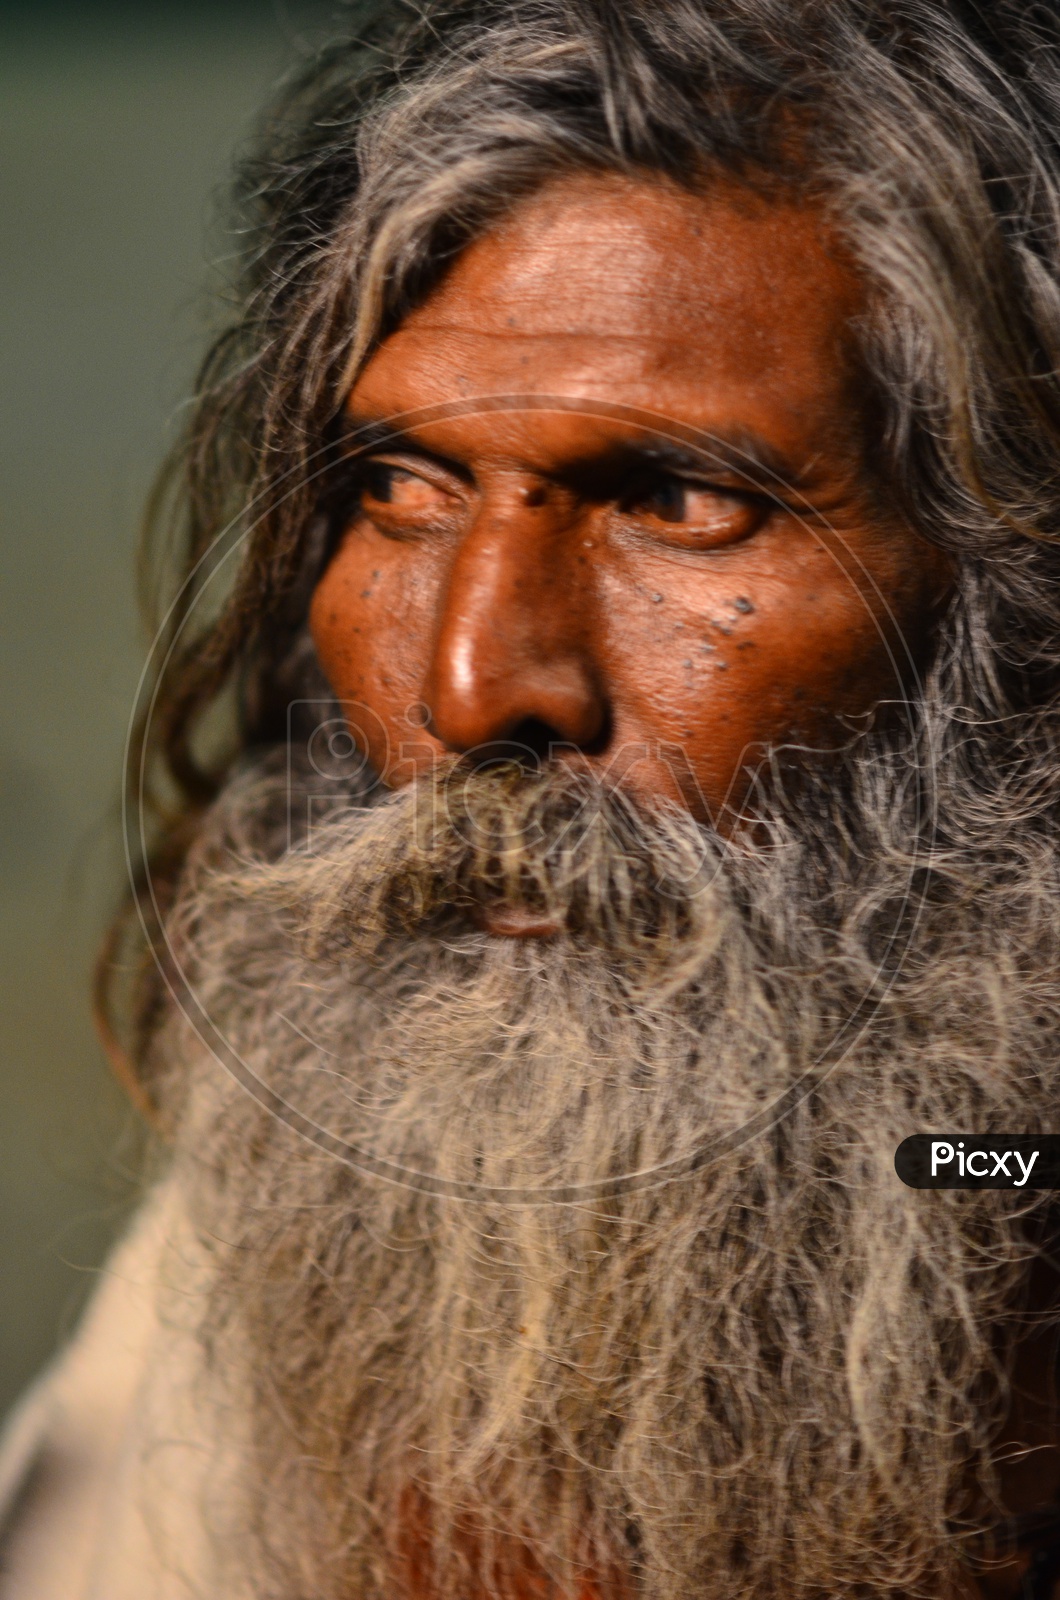 Portrait of a  Indian Sadhu Or Baba With Beard